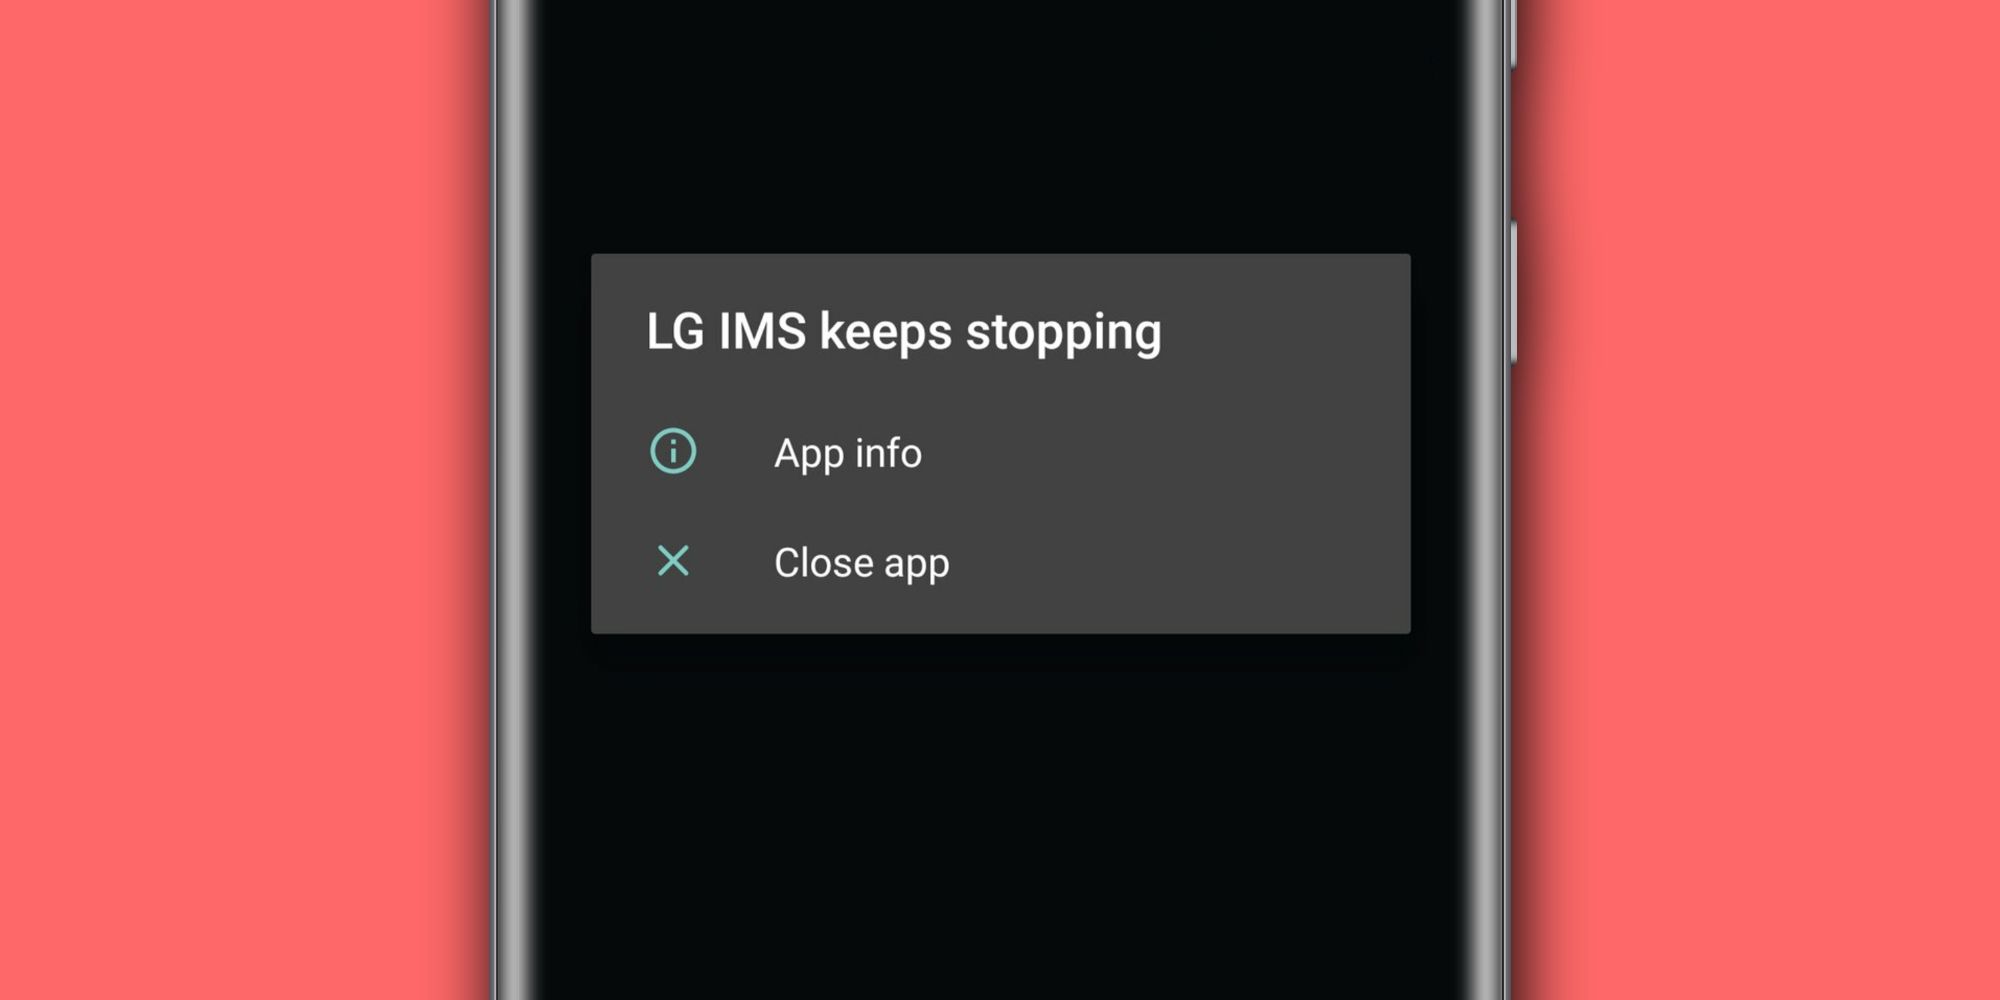 What Is The LG IMS App & Why Does It Keep Stopping? | Screen Rant